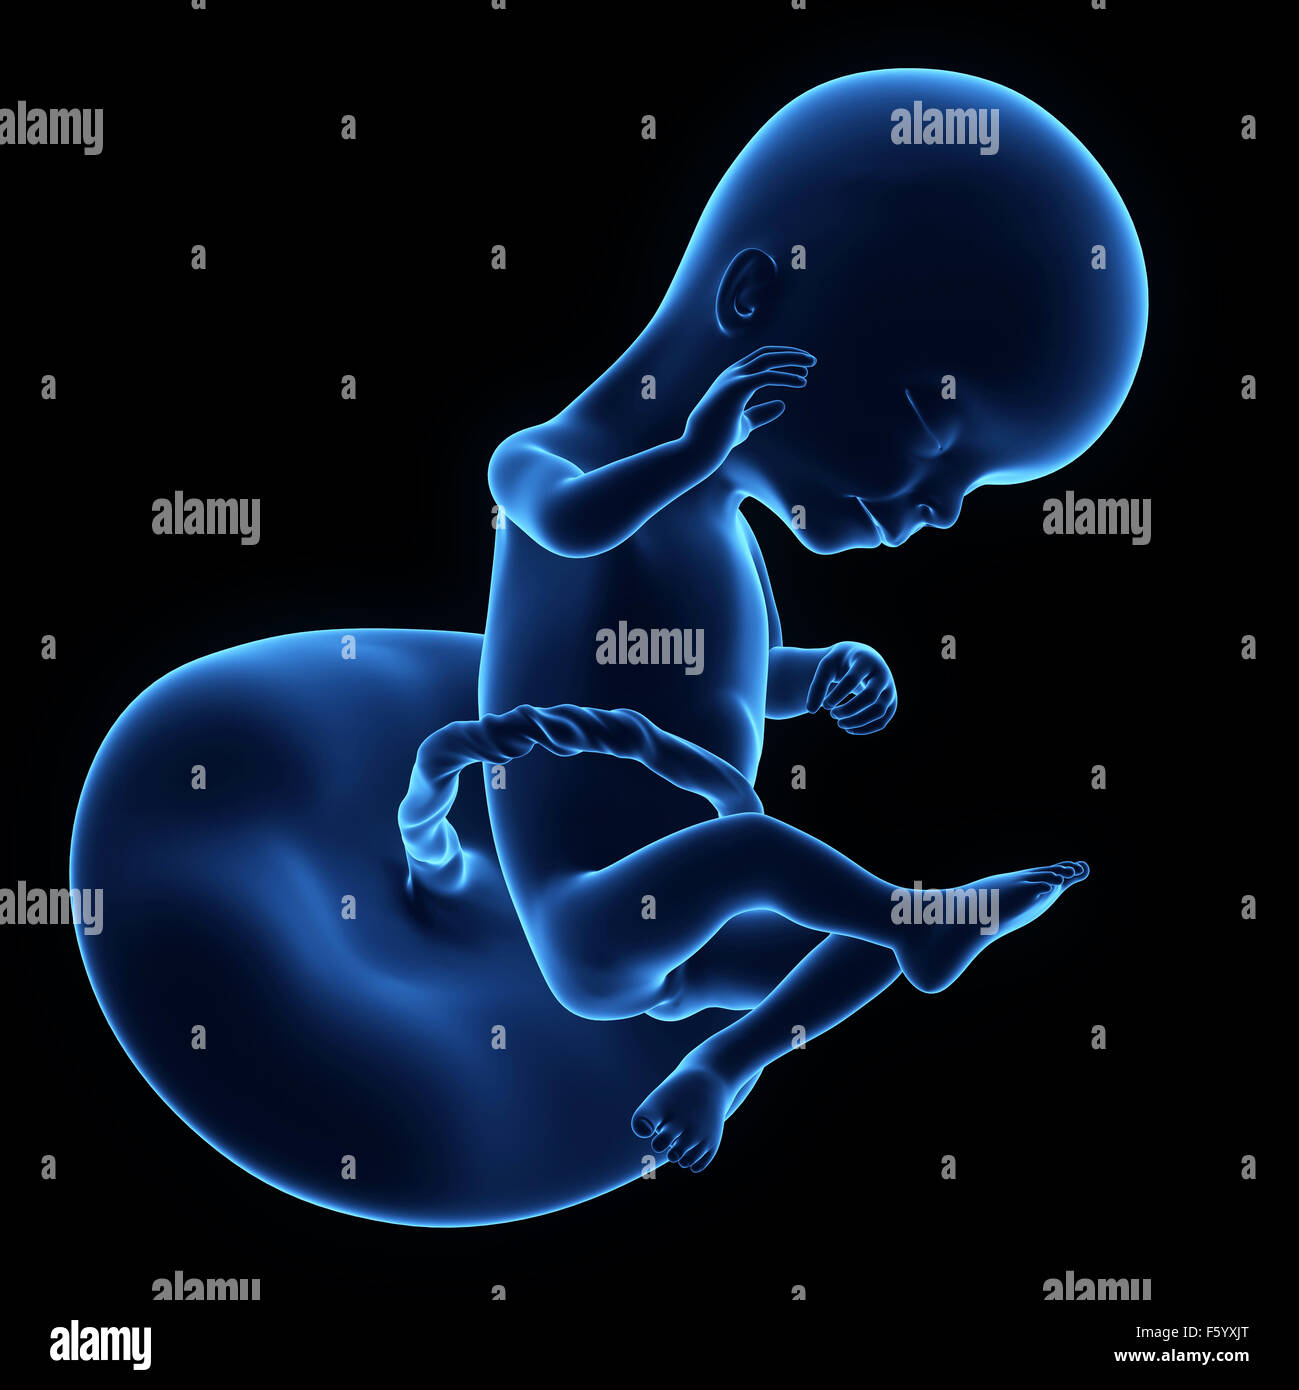 medically accurate illustration of a human fetus week 16 Stock Photo